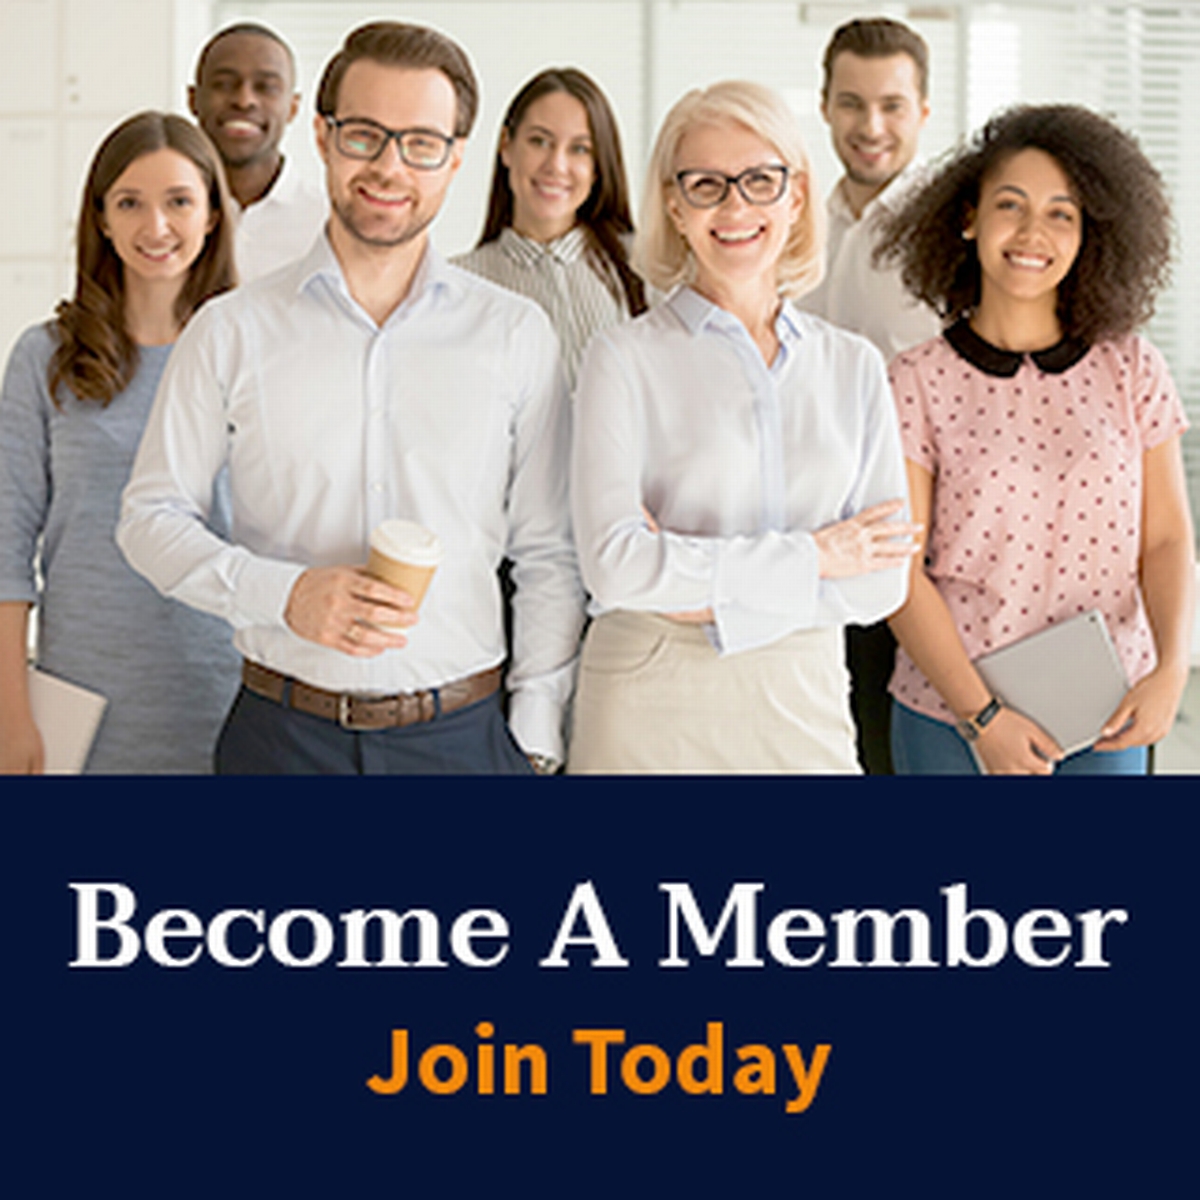 Become a member - join today!